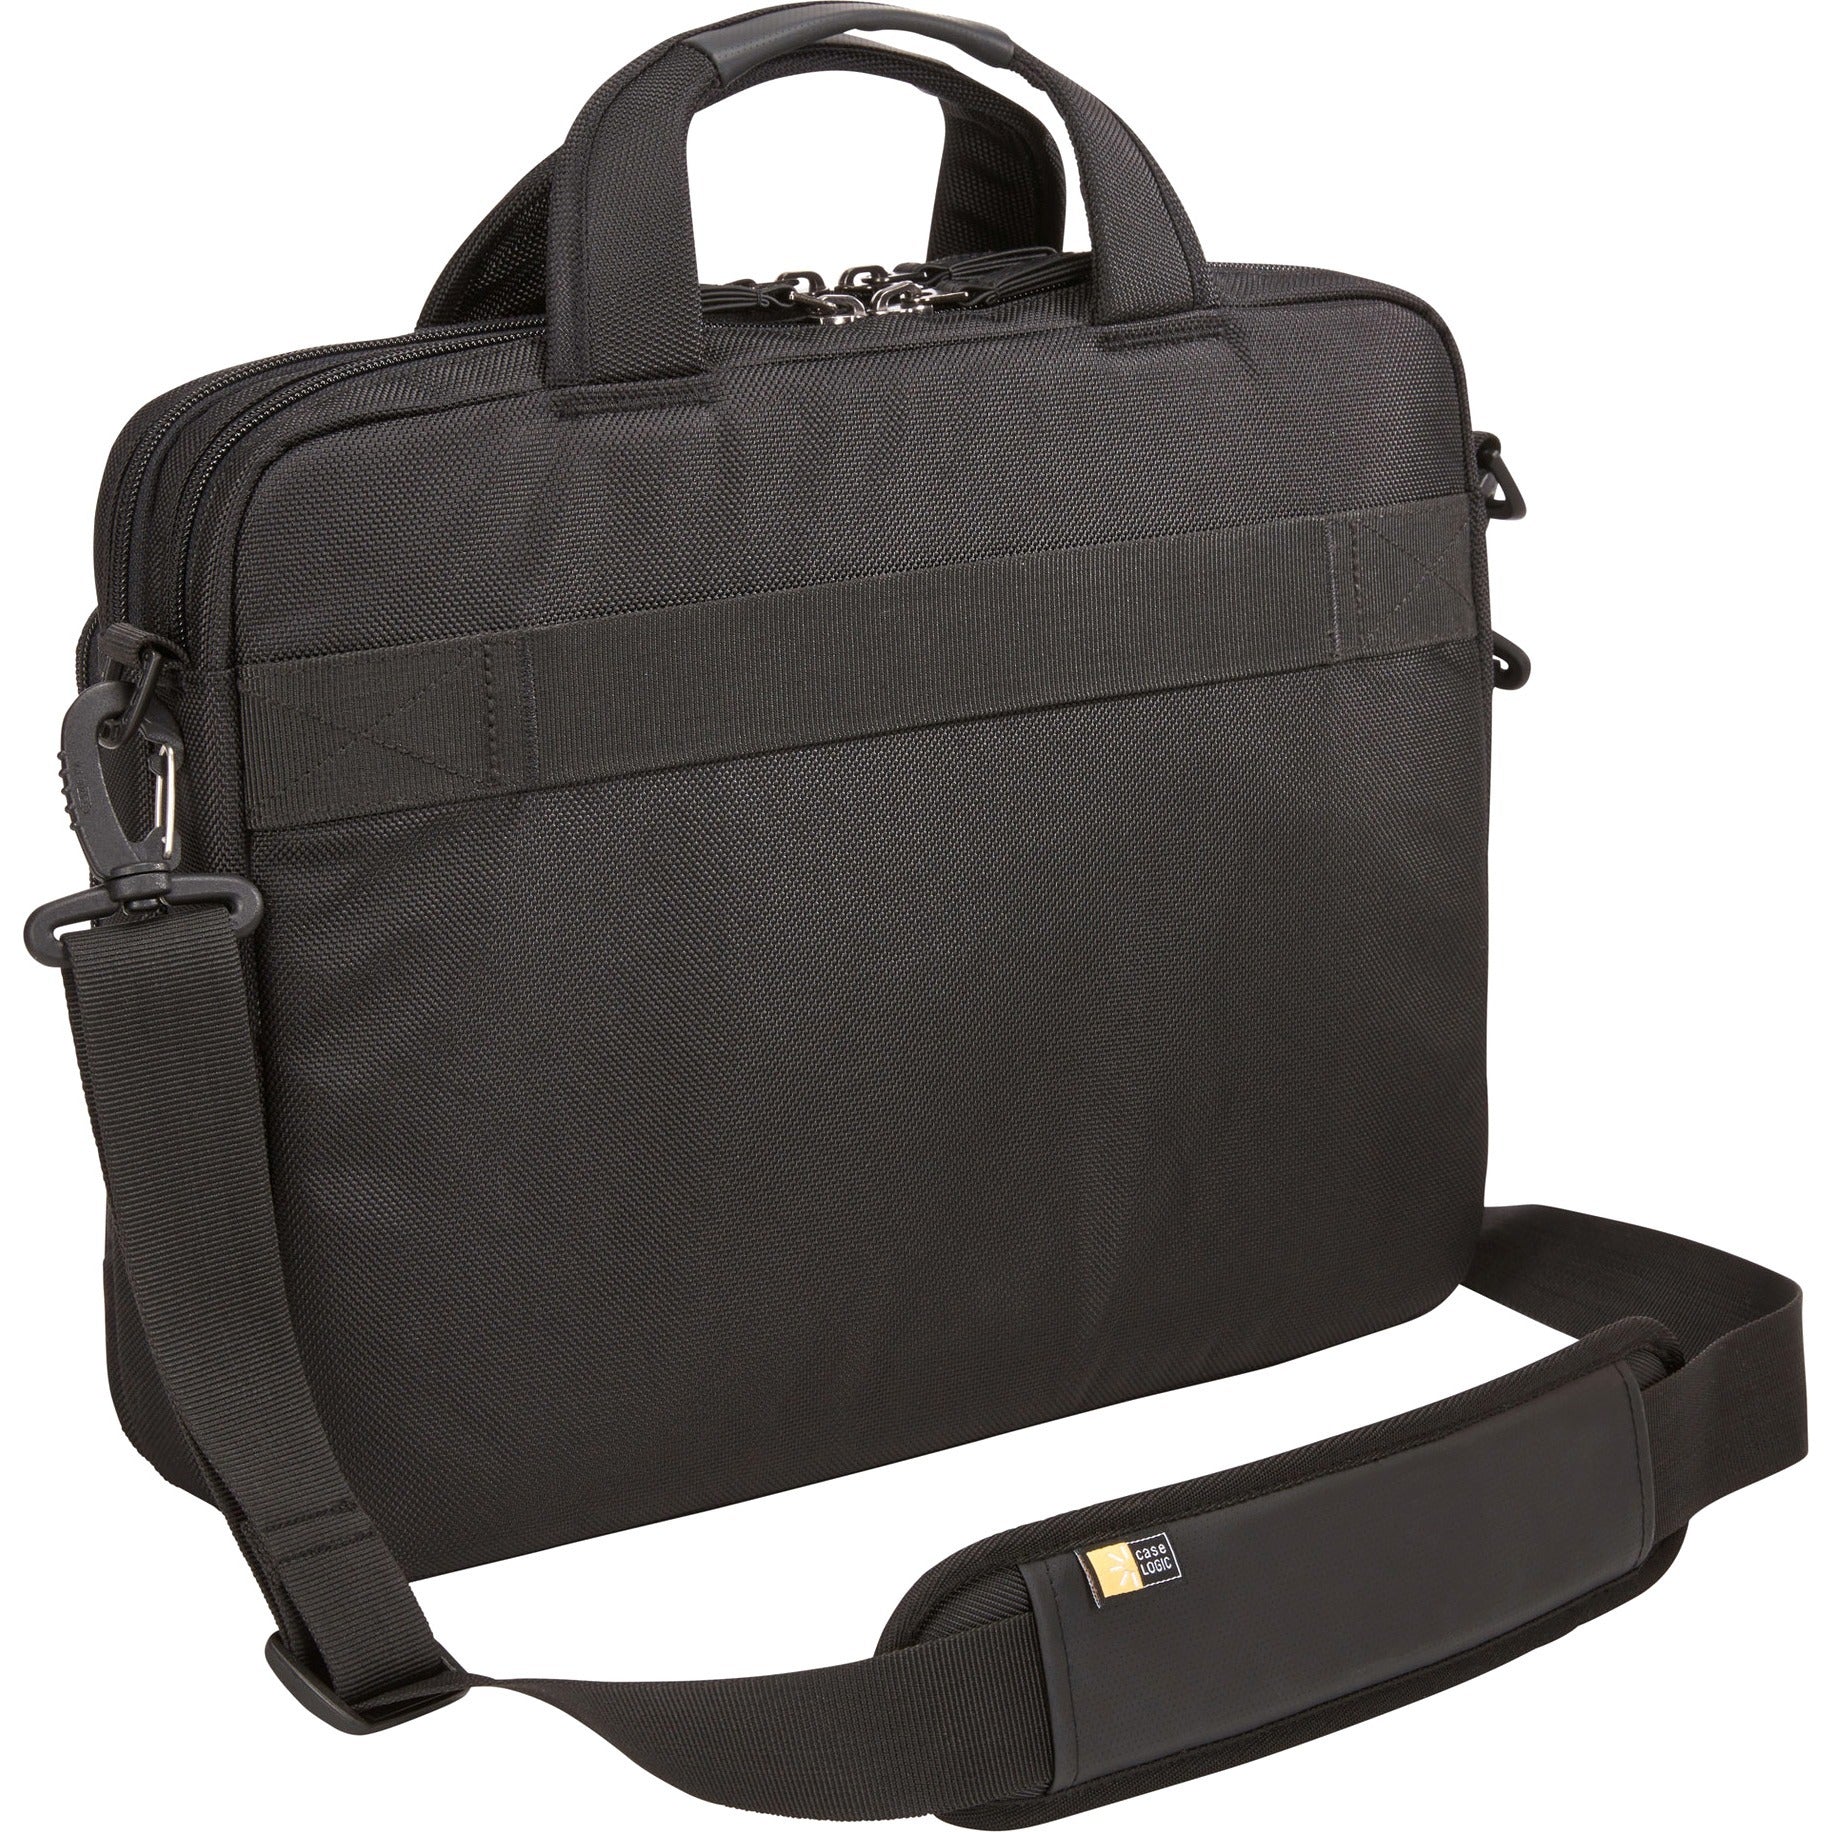 Case Logic Carrying Case (Briefcase) for 14" Notebook, Tablet PC, Portable Electronics, Accessories - Black